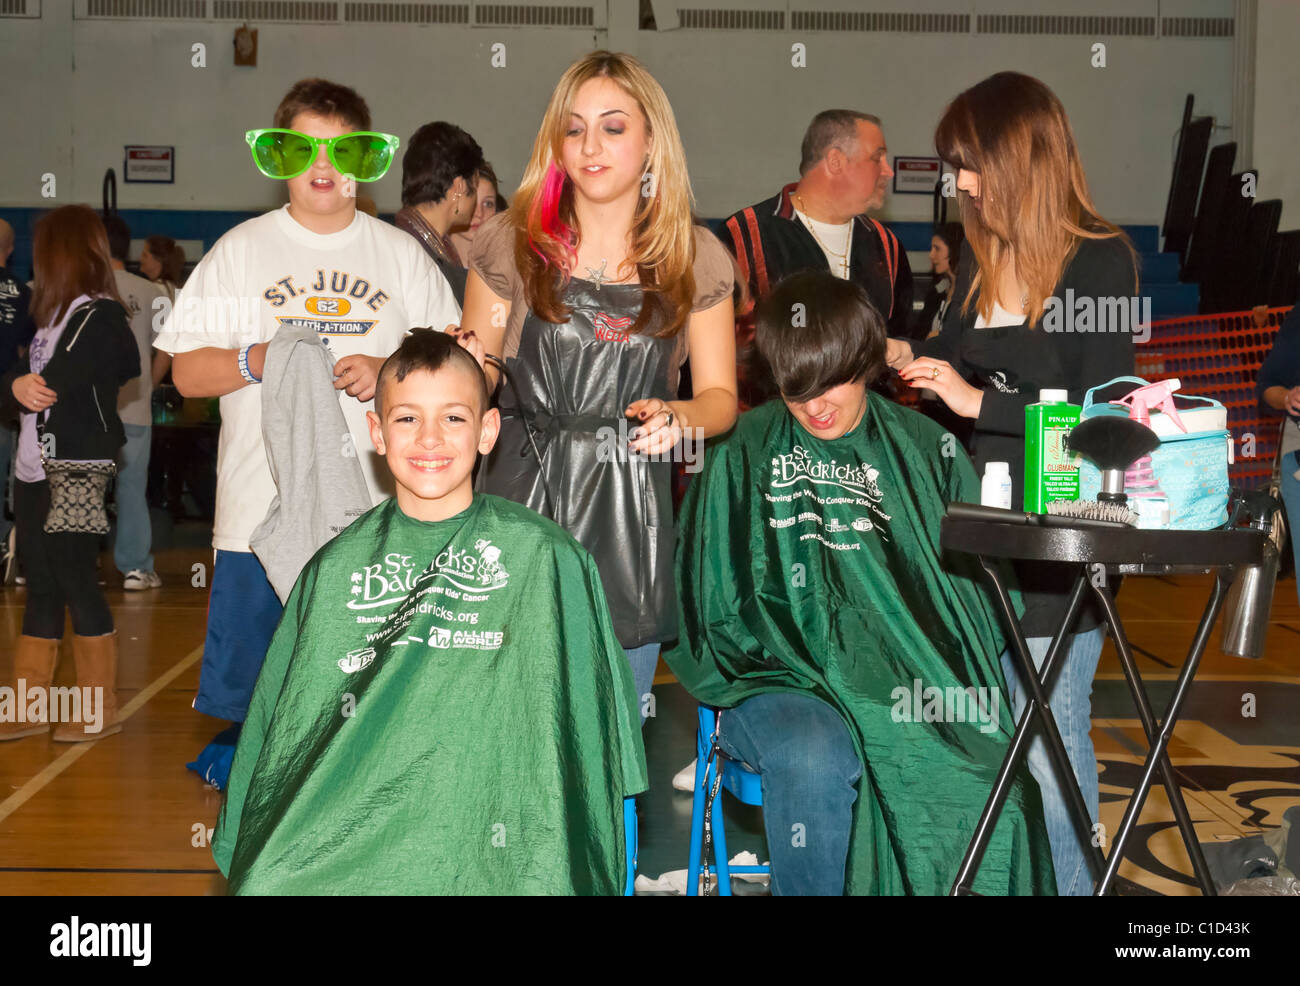 MARCH 15 2011 - MERRICK NY: St. Baldrick's Day at Calhoun High School, boys getting hair shaved off for childhood cancer charity Stock Photo